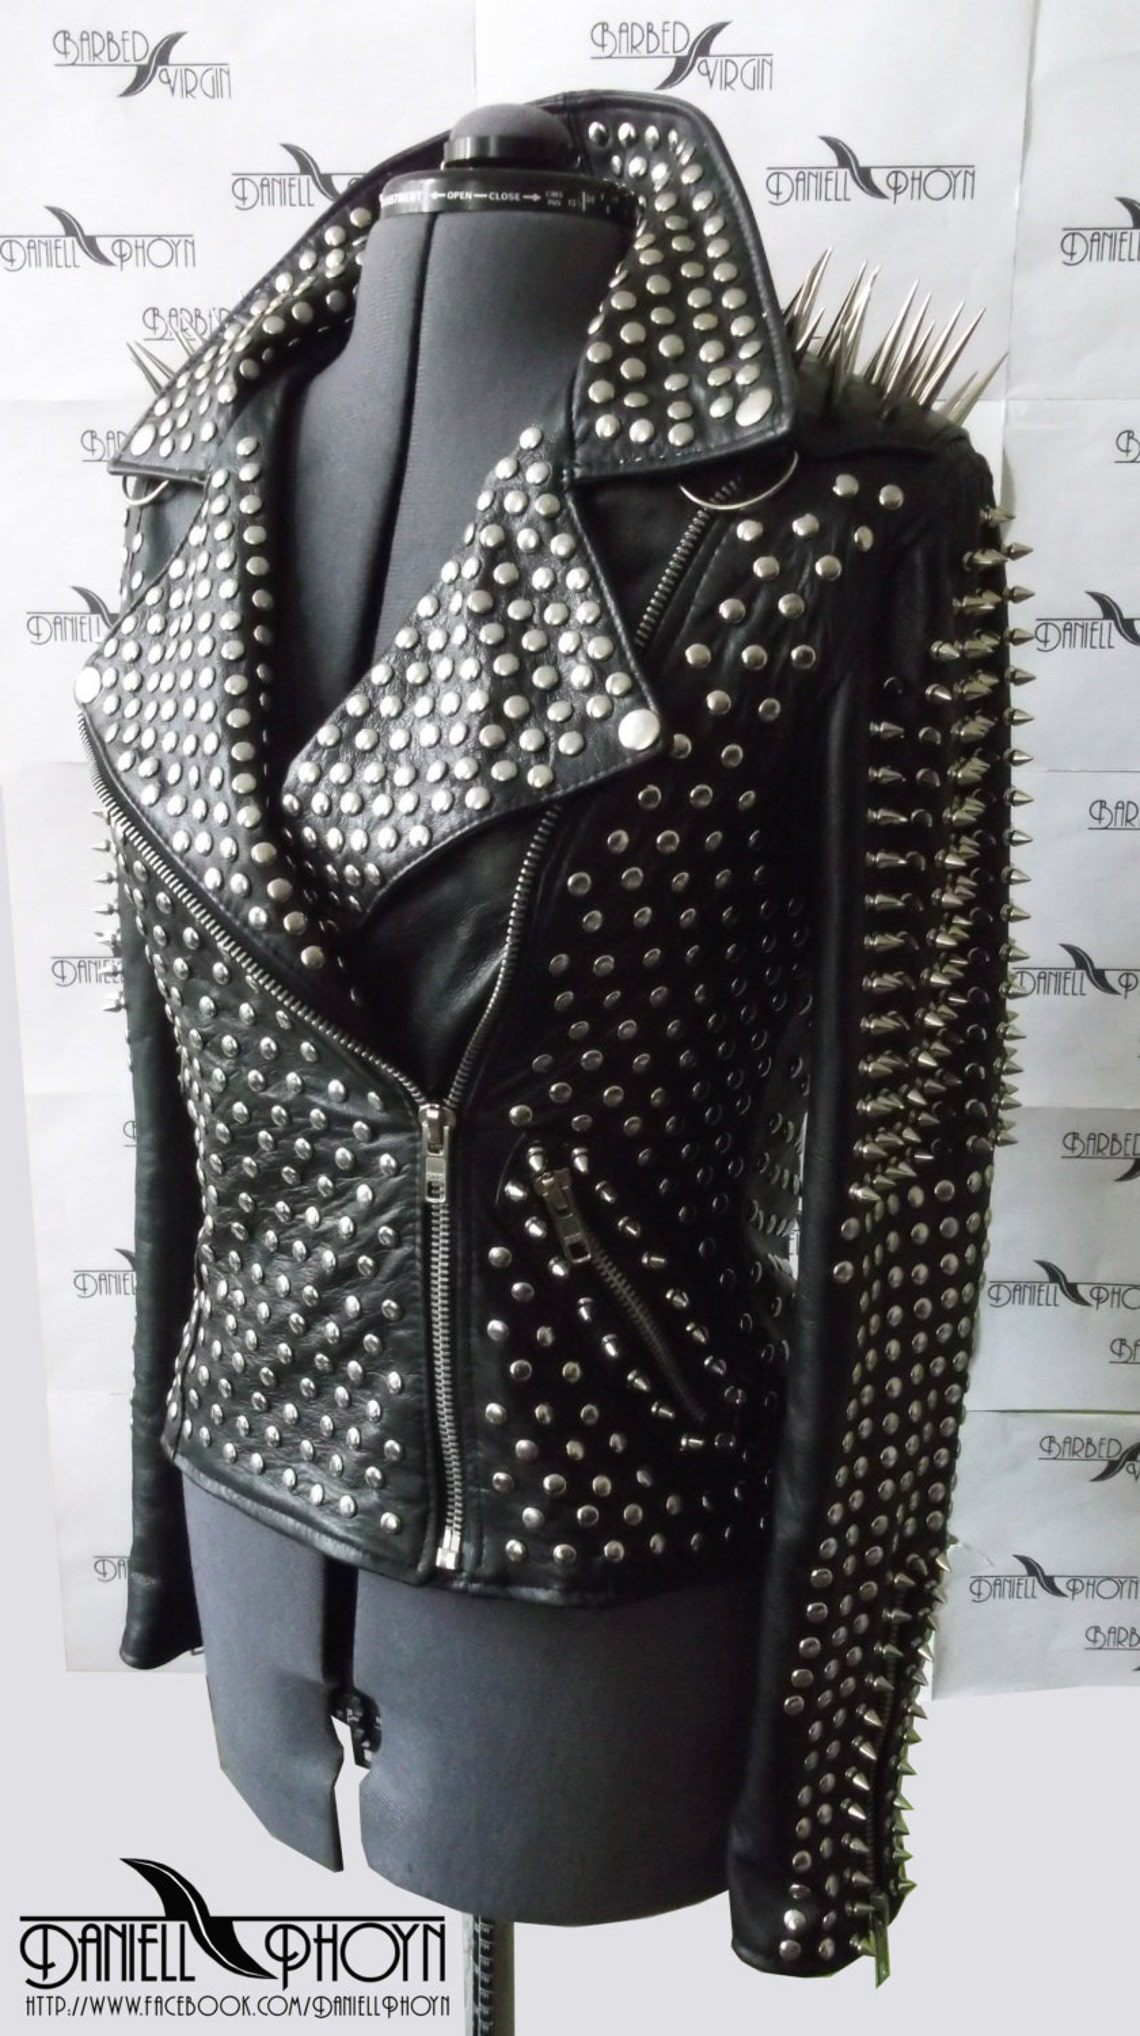 Extreme Leather Jacket With Spikes | Etsy